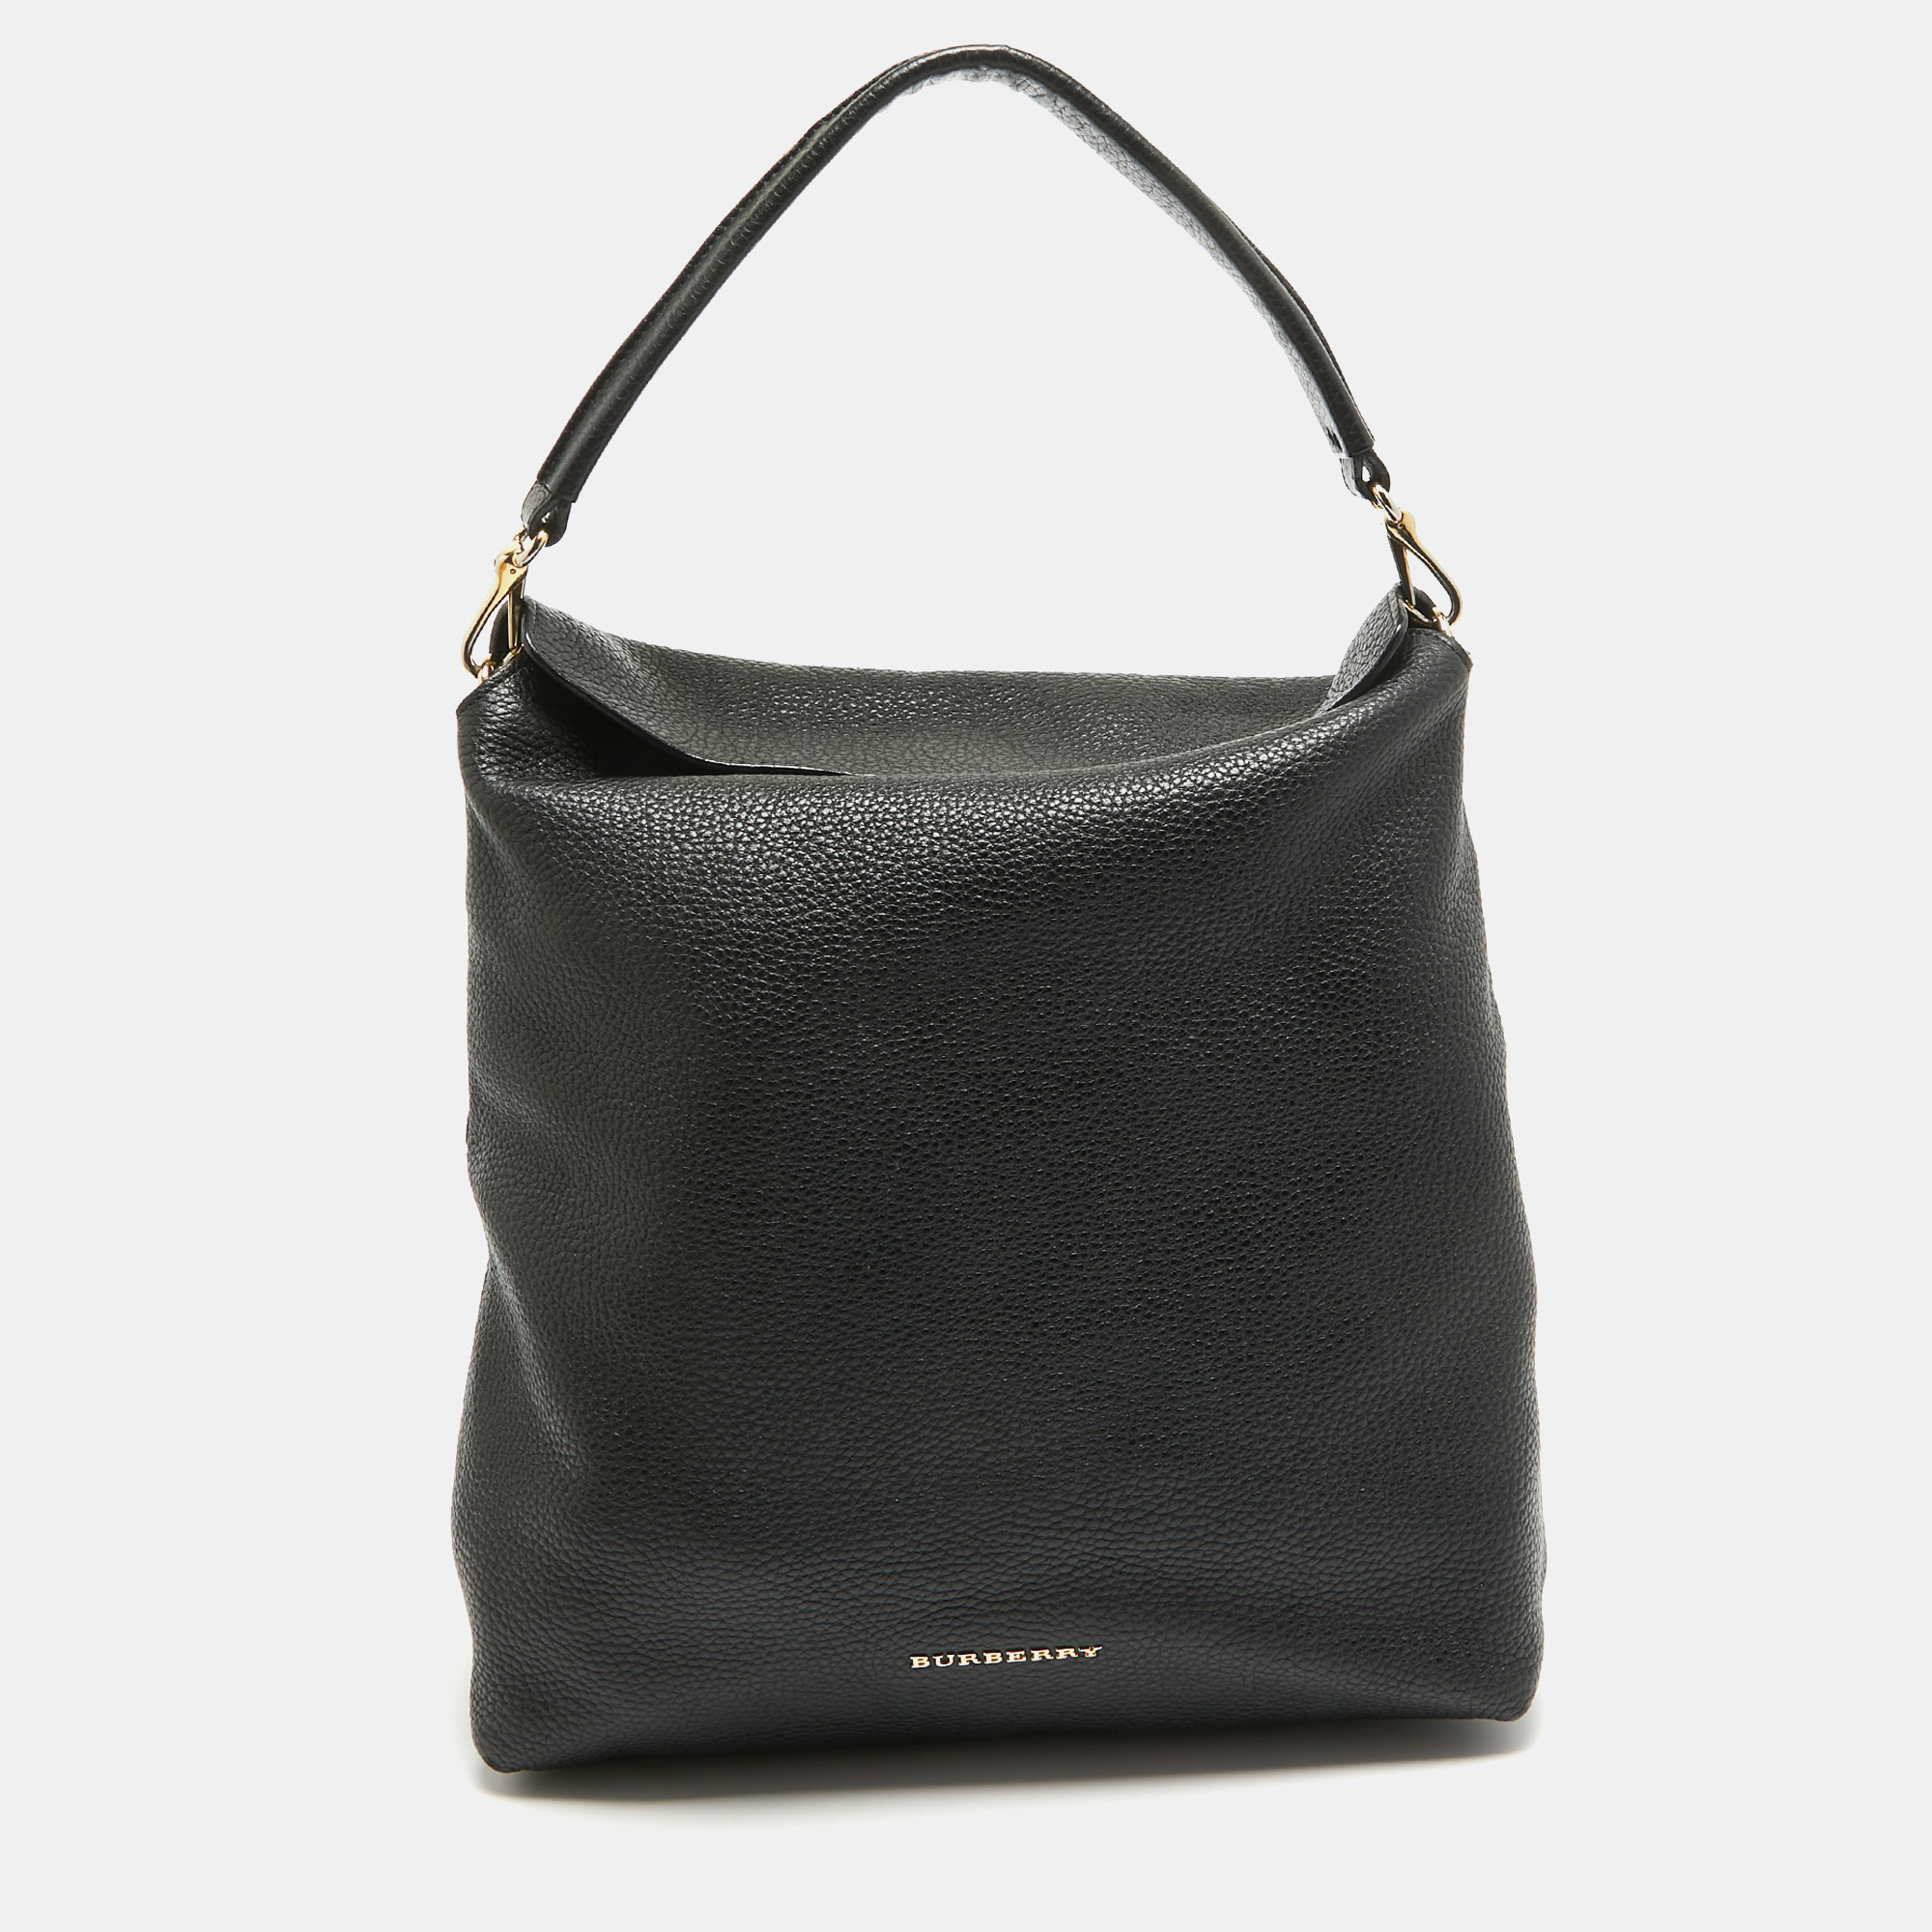 Pre-owned Burberry Black Leather Cale Hobo